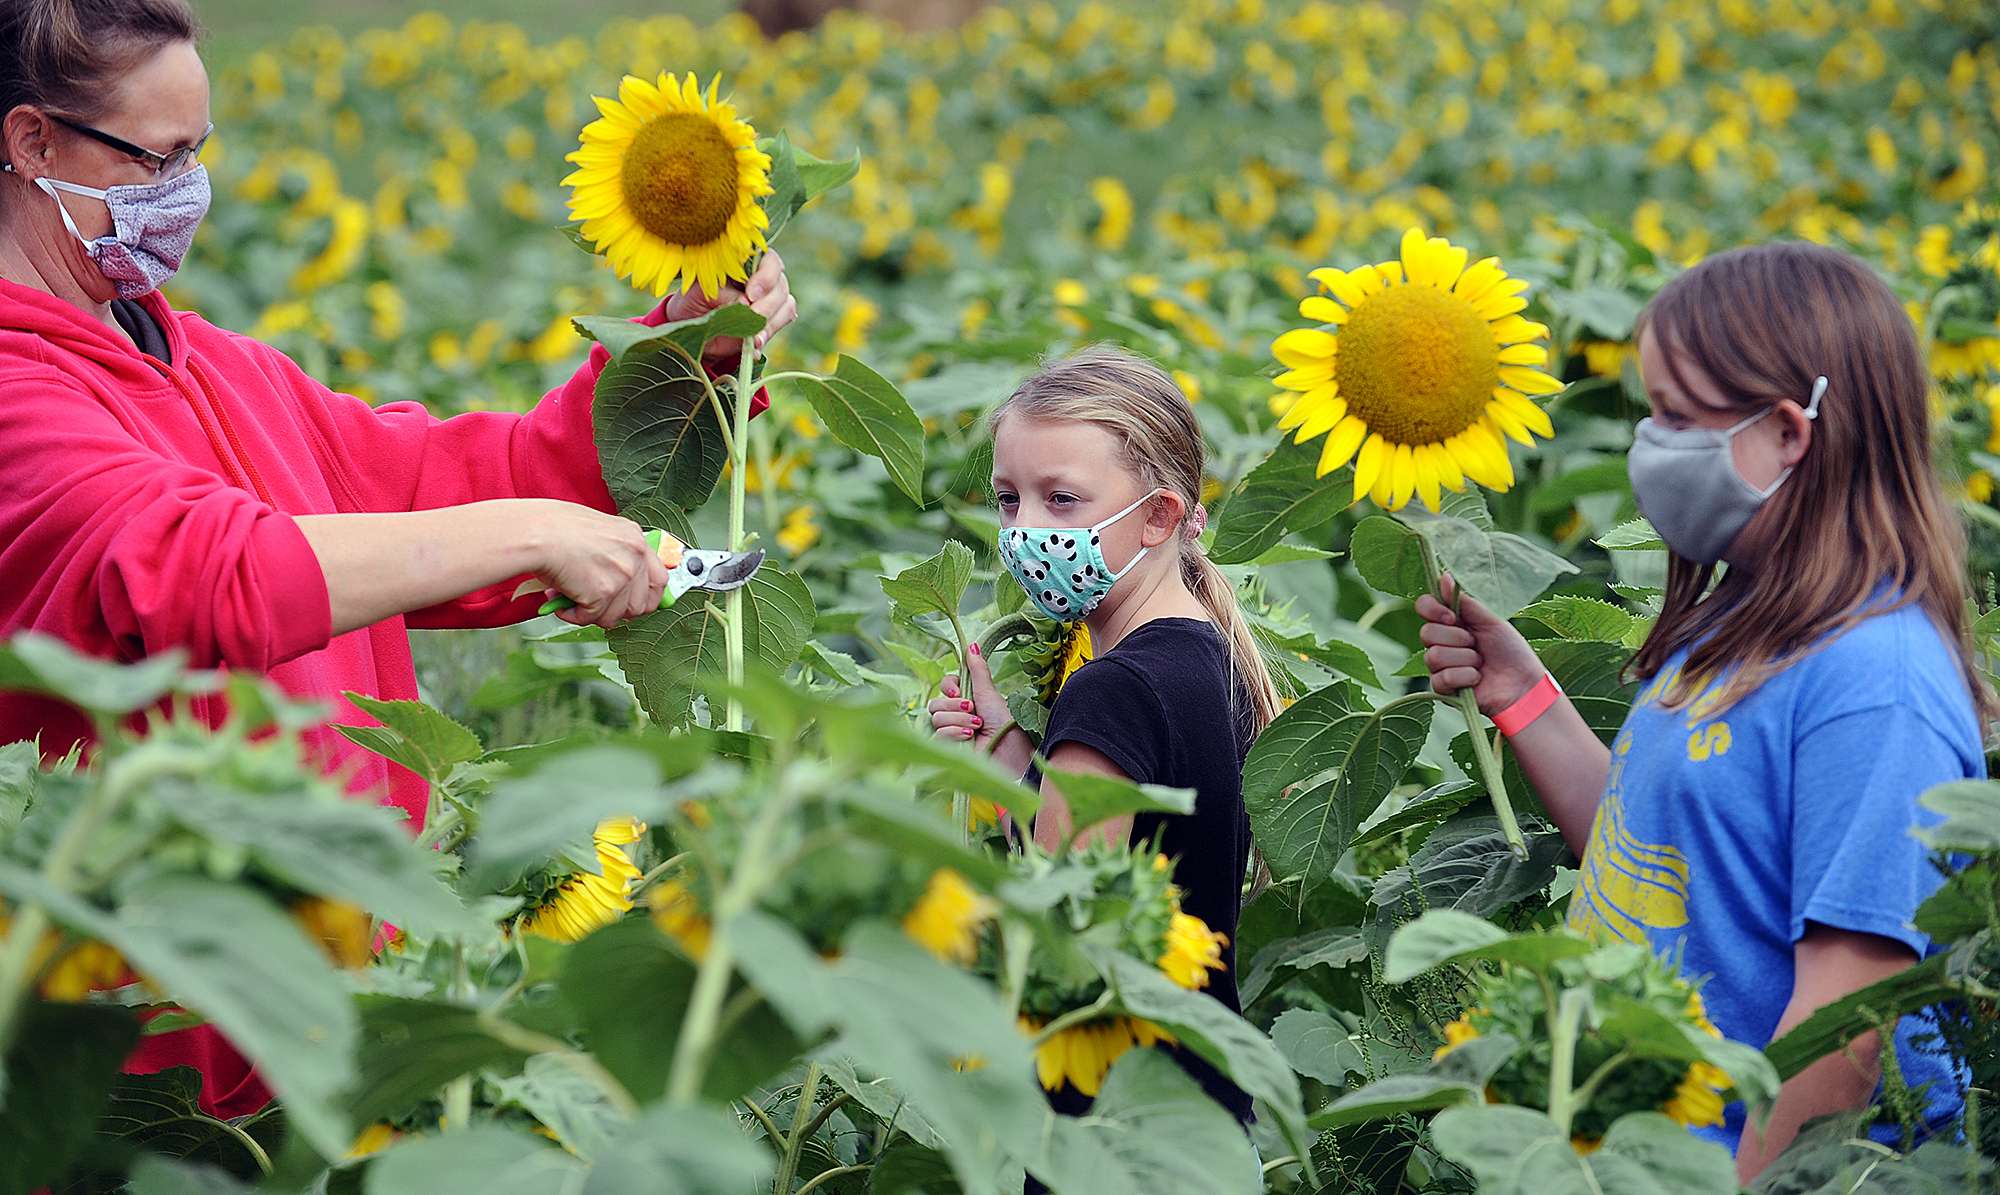 8/31/2020-- FRAMINGHAM-- At Hanson's Farm, Brenda Fraher, of Framingham, cuts sunflowers Monday afternoon with Audrey, 12, and Gretchen, 10. [Daily News and Wicked Local Staff Photo/Art Illman]